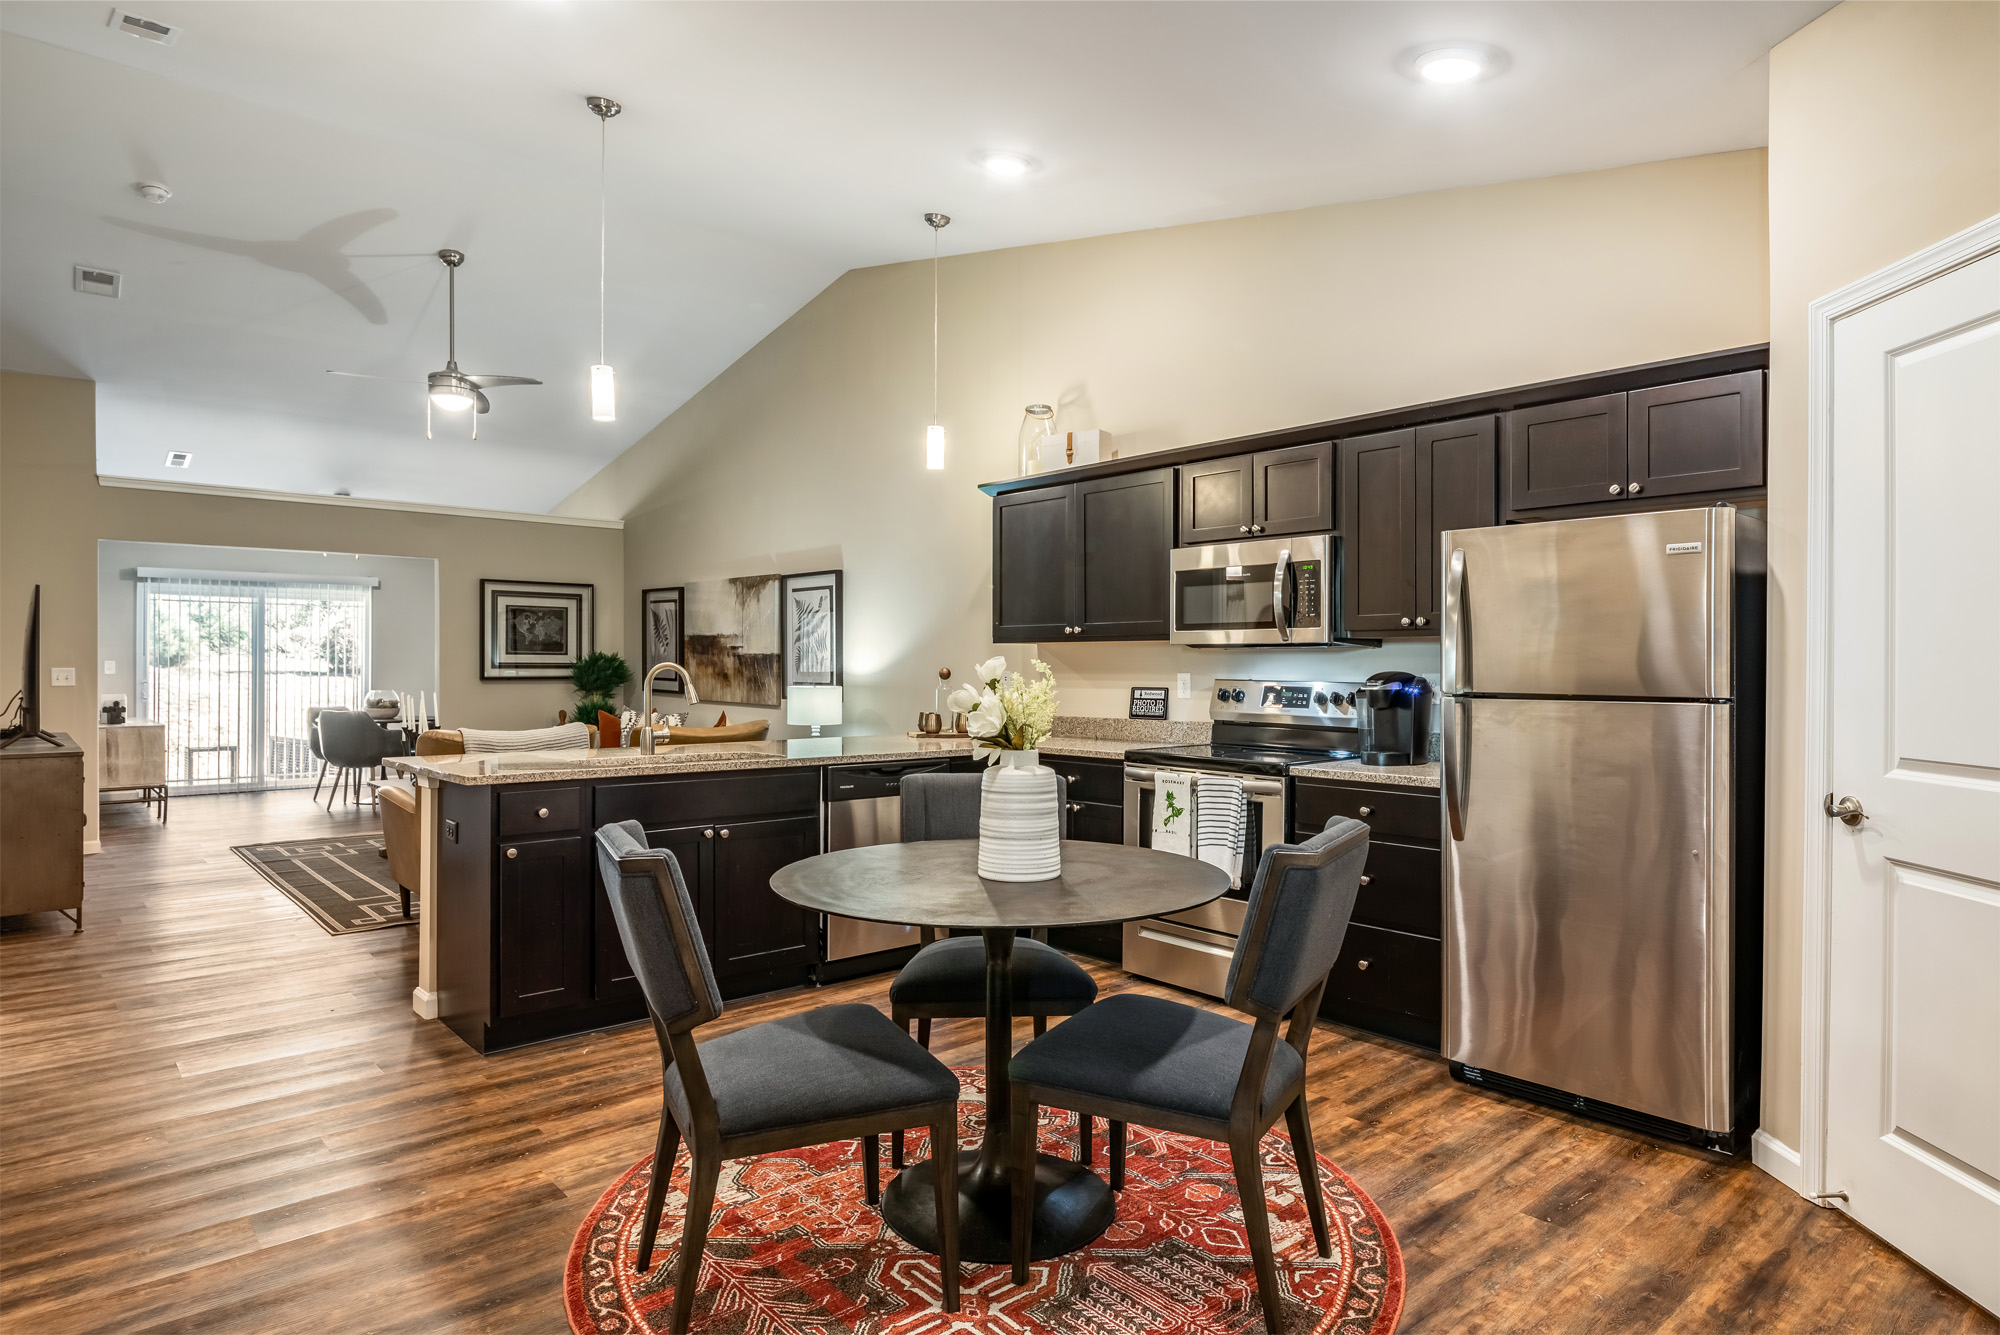 Spacious Kitchens with Breakfast Bar and Room for a Dining Table